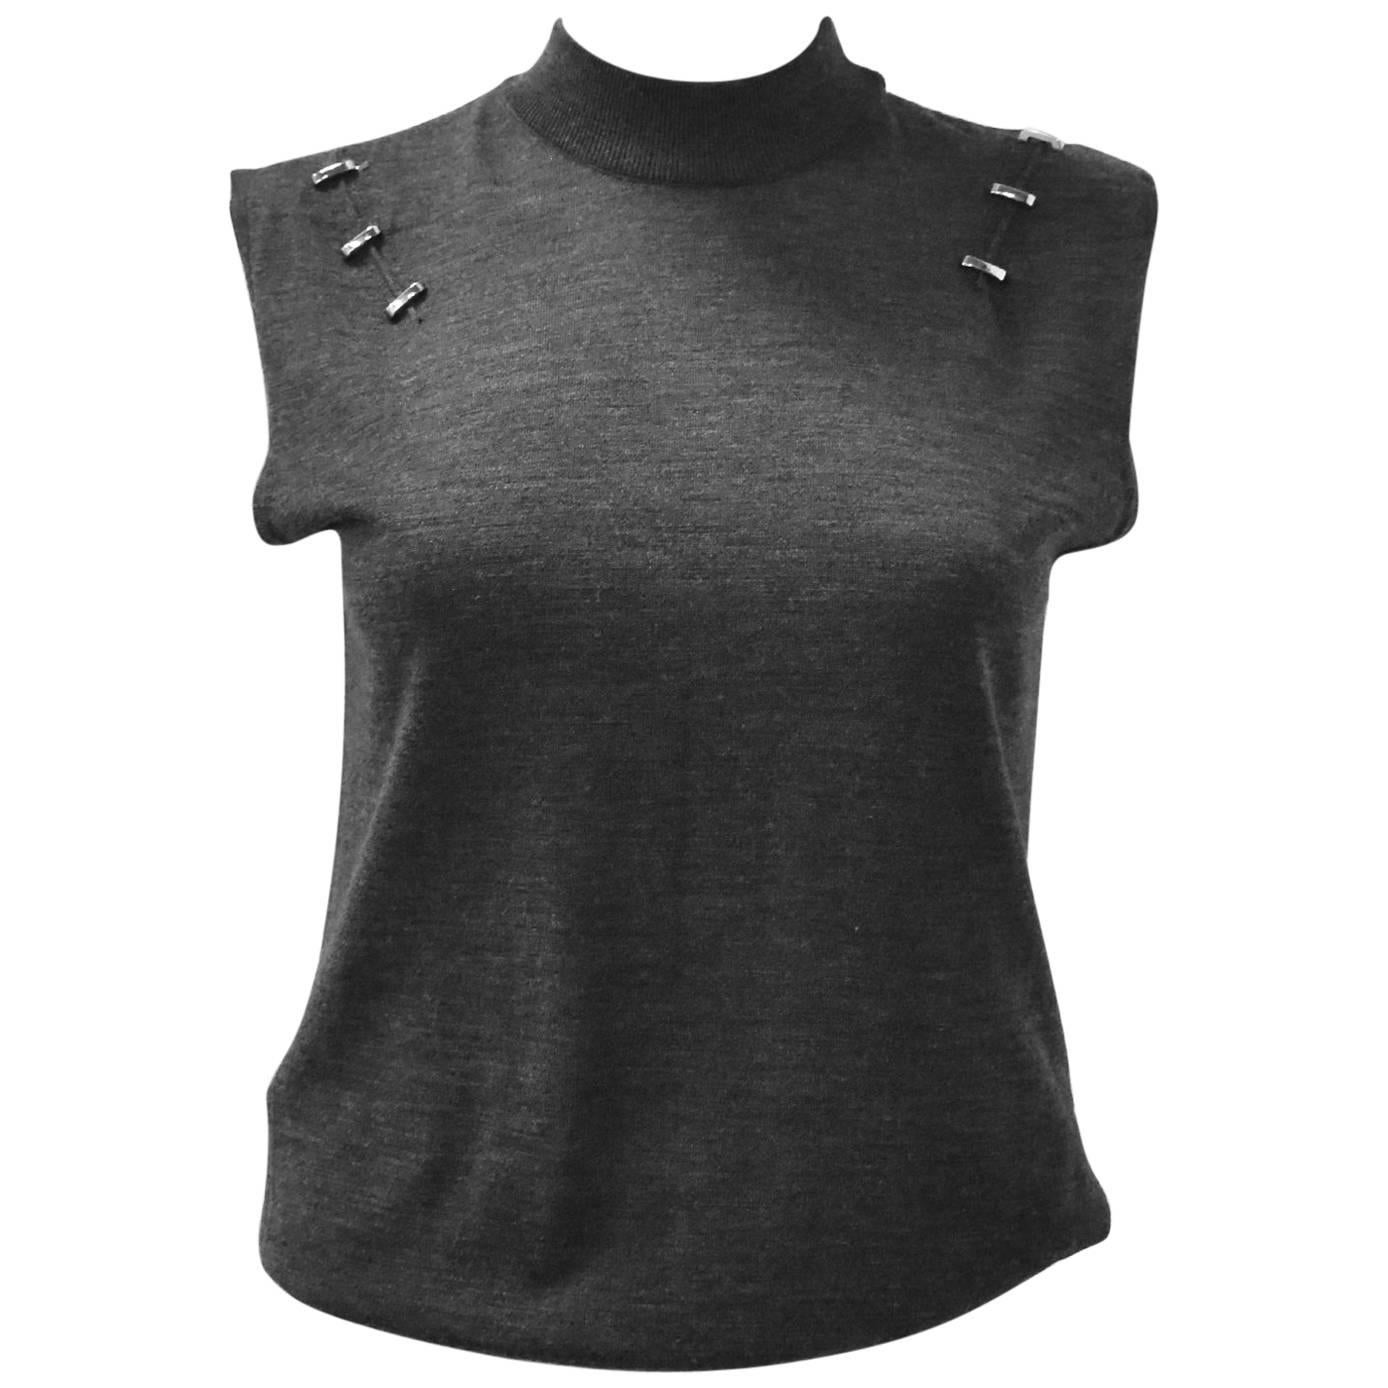 Paco Rabanne Grey Wool Knit Top with Silver Hardware Details For Sale